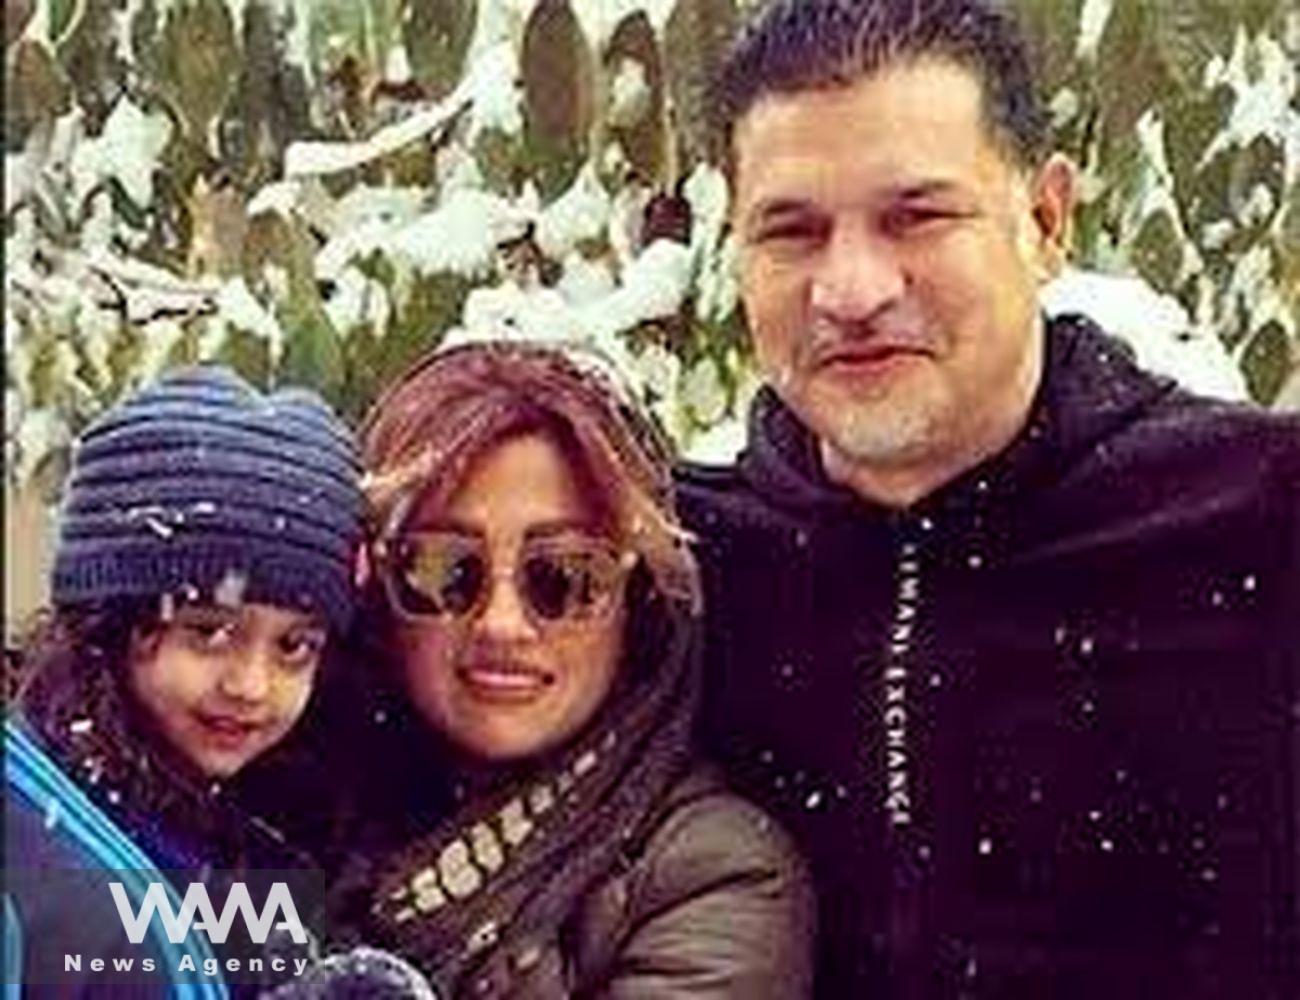 Ali Daei, famous Iranian footballer, His wife and his daughter. Social Media / WANA News Agency